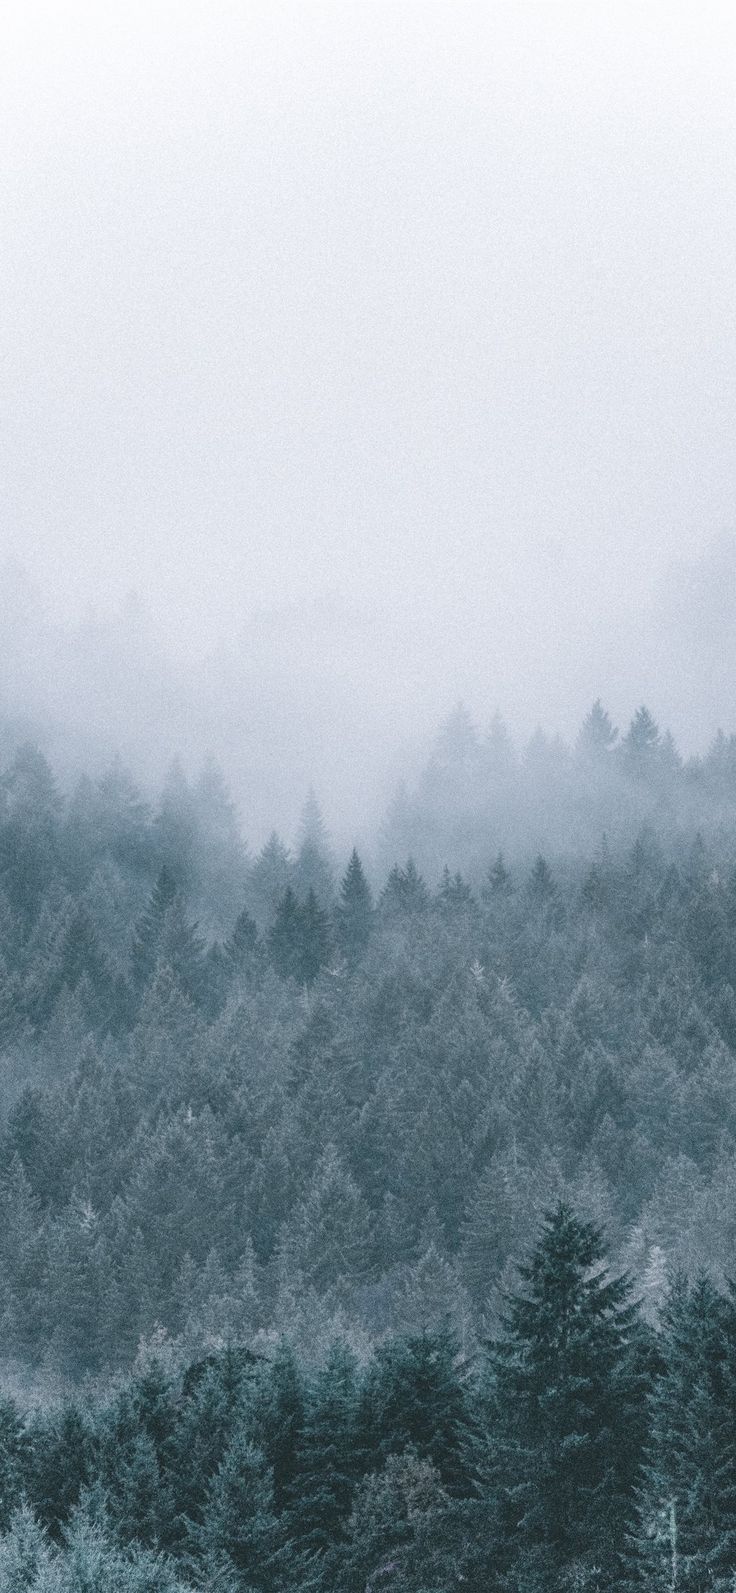 foggy icy green pine trees scenery Wallpaper. Tree scenery wallpaper, Tree wallpaper iphone, Scenery wallpaper